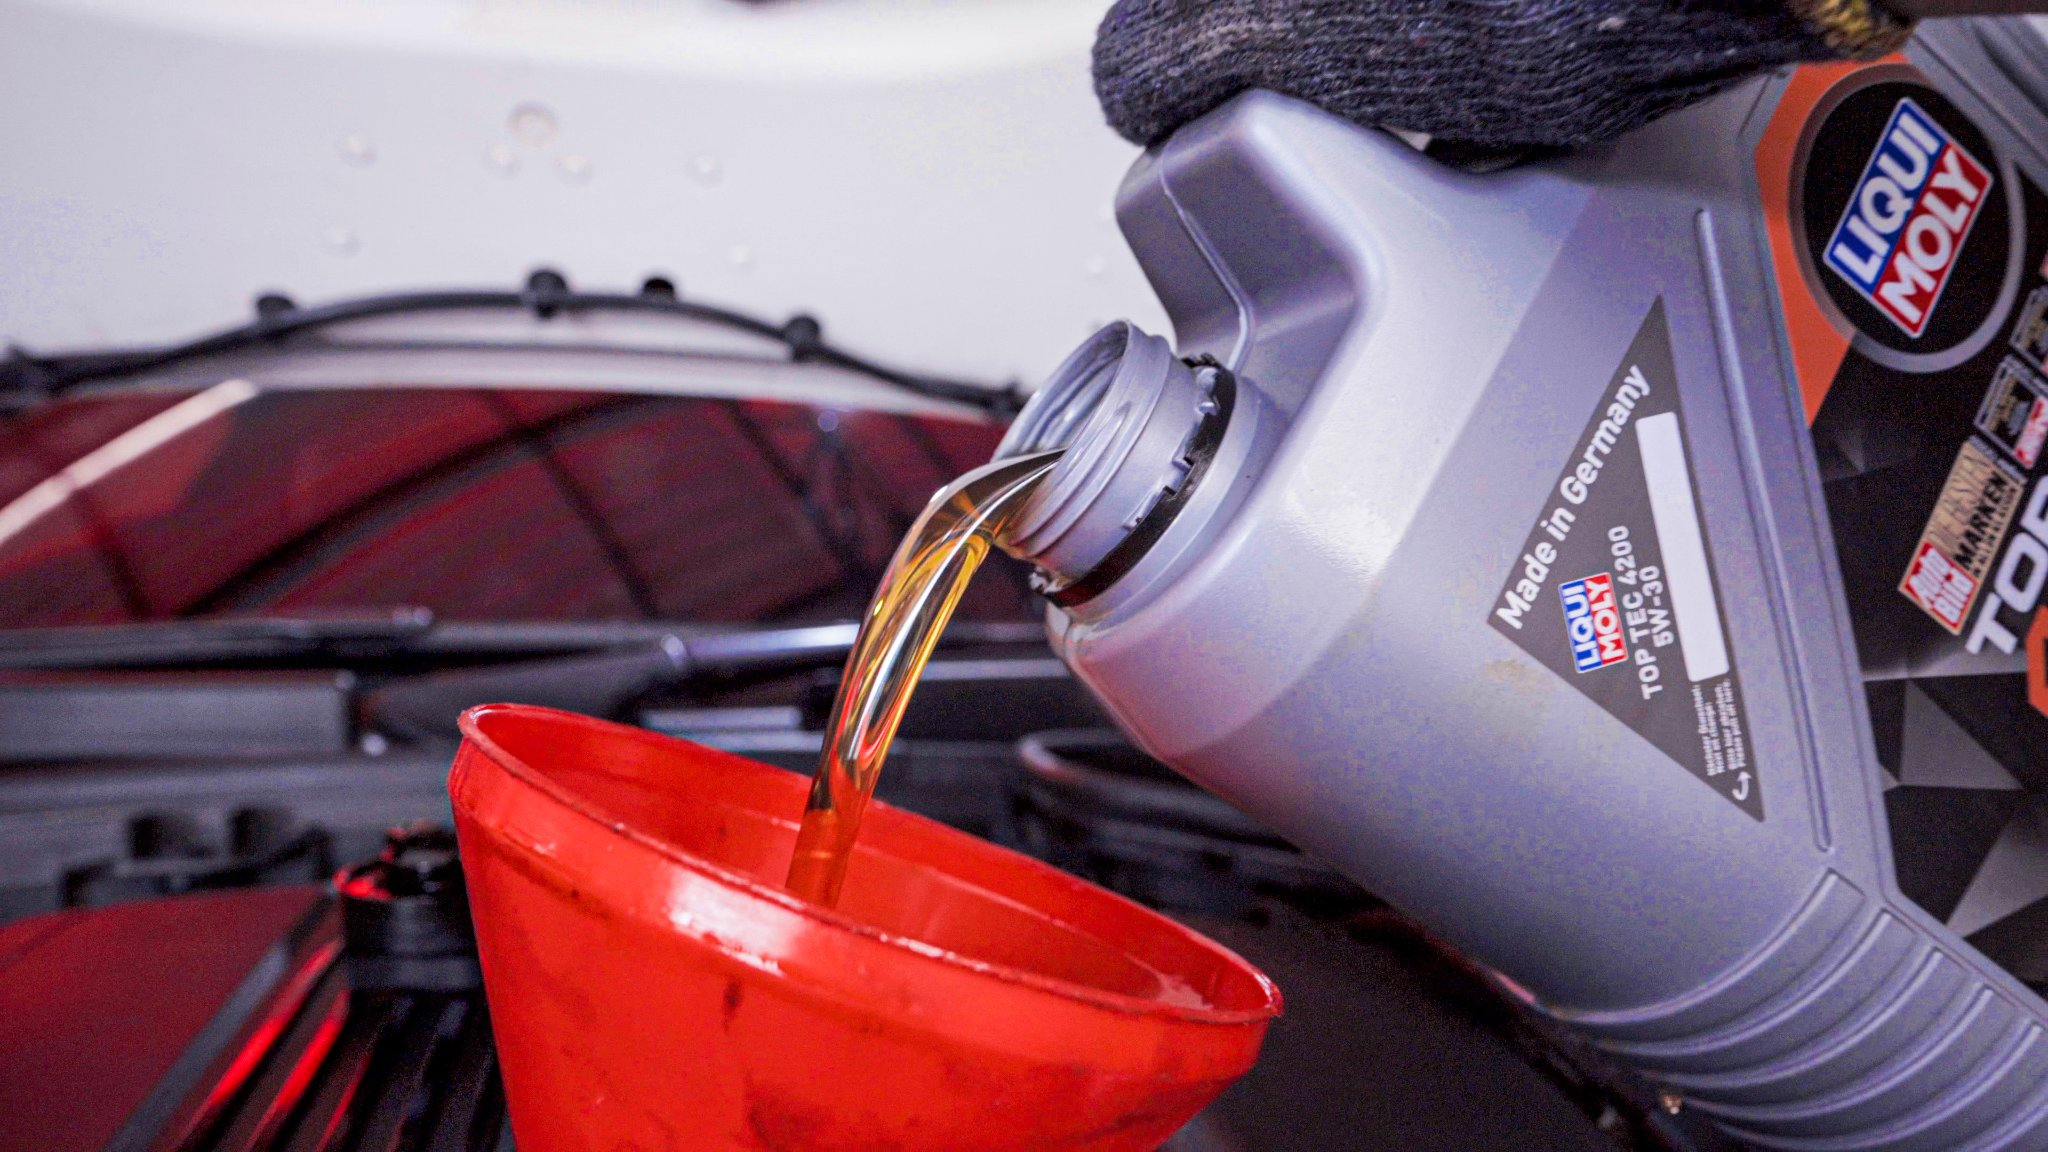 Refill the new oil into the Mercedes engine and make sure you are not overfilling the oil tank